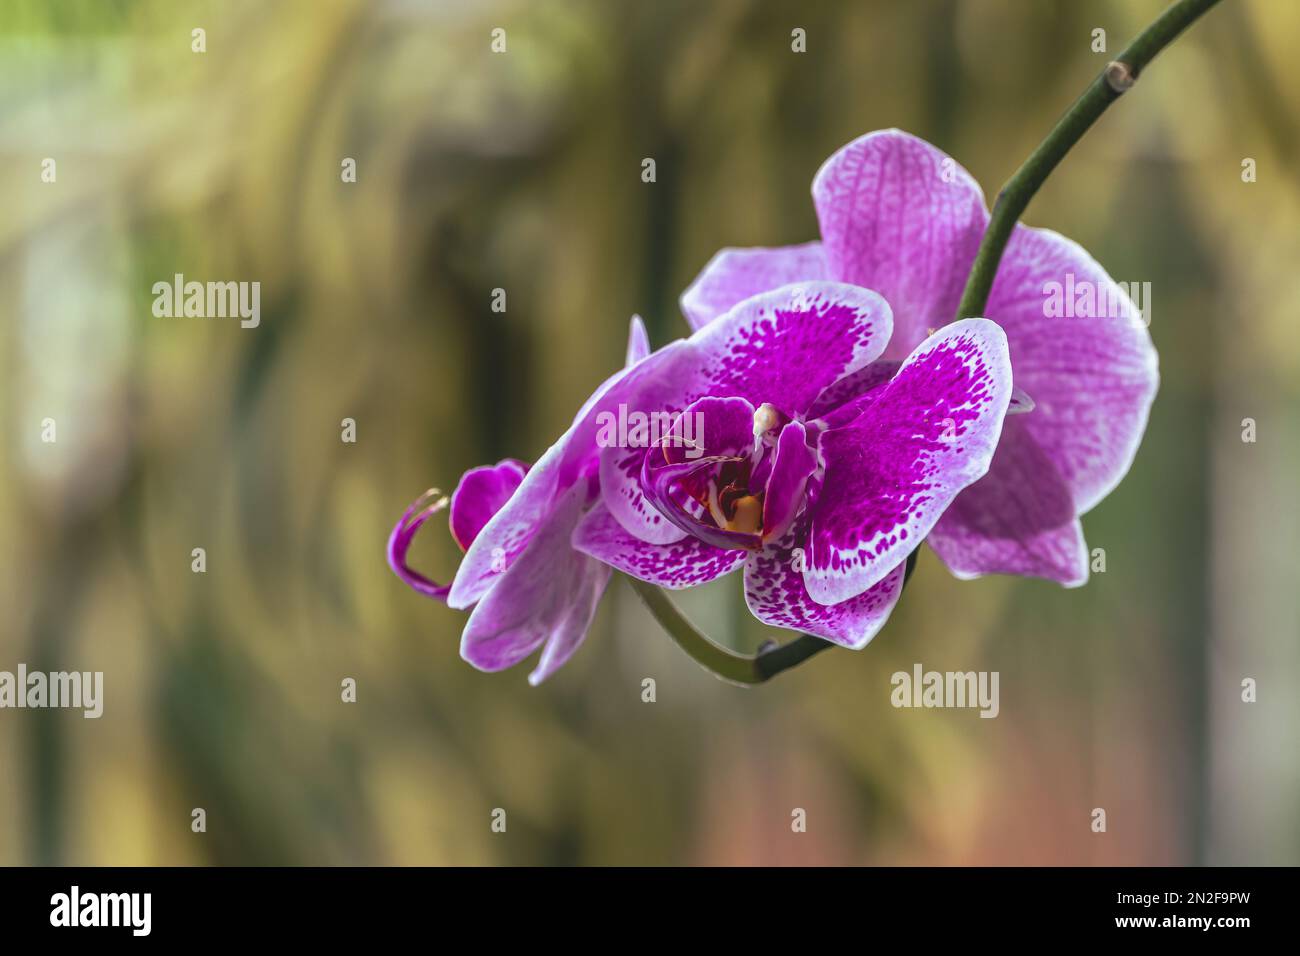 A bright purple blooming orchid flower, blurred leaves background Stock Photo